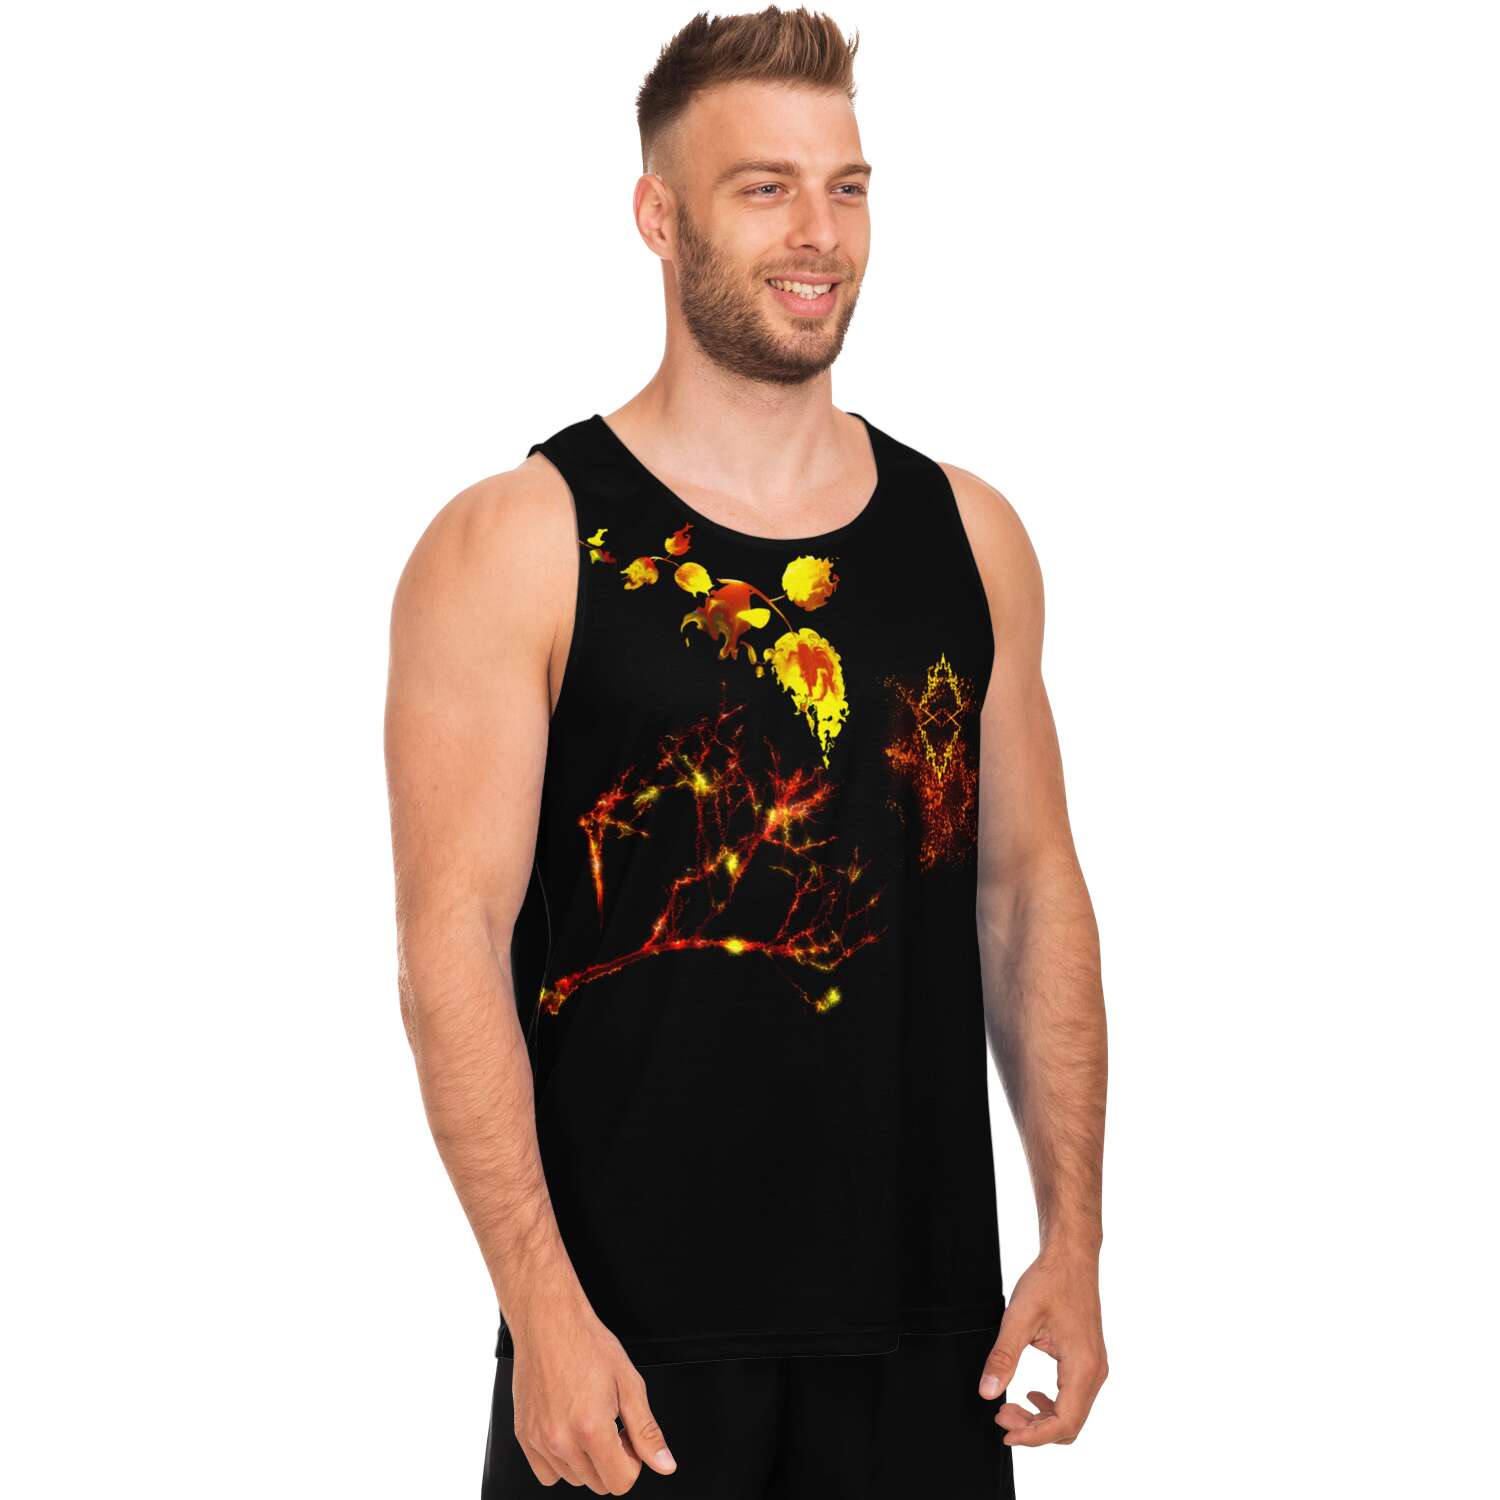 Taiga-Zoku  (Prototype Line) "Amber Forest Echoes" Tanktop - Who R We Collective